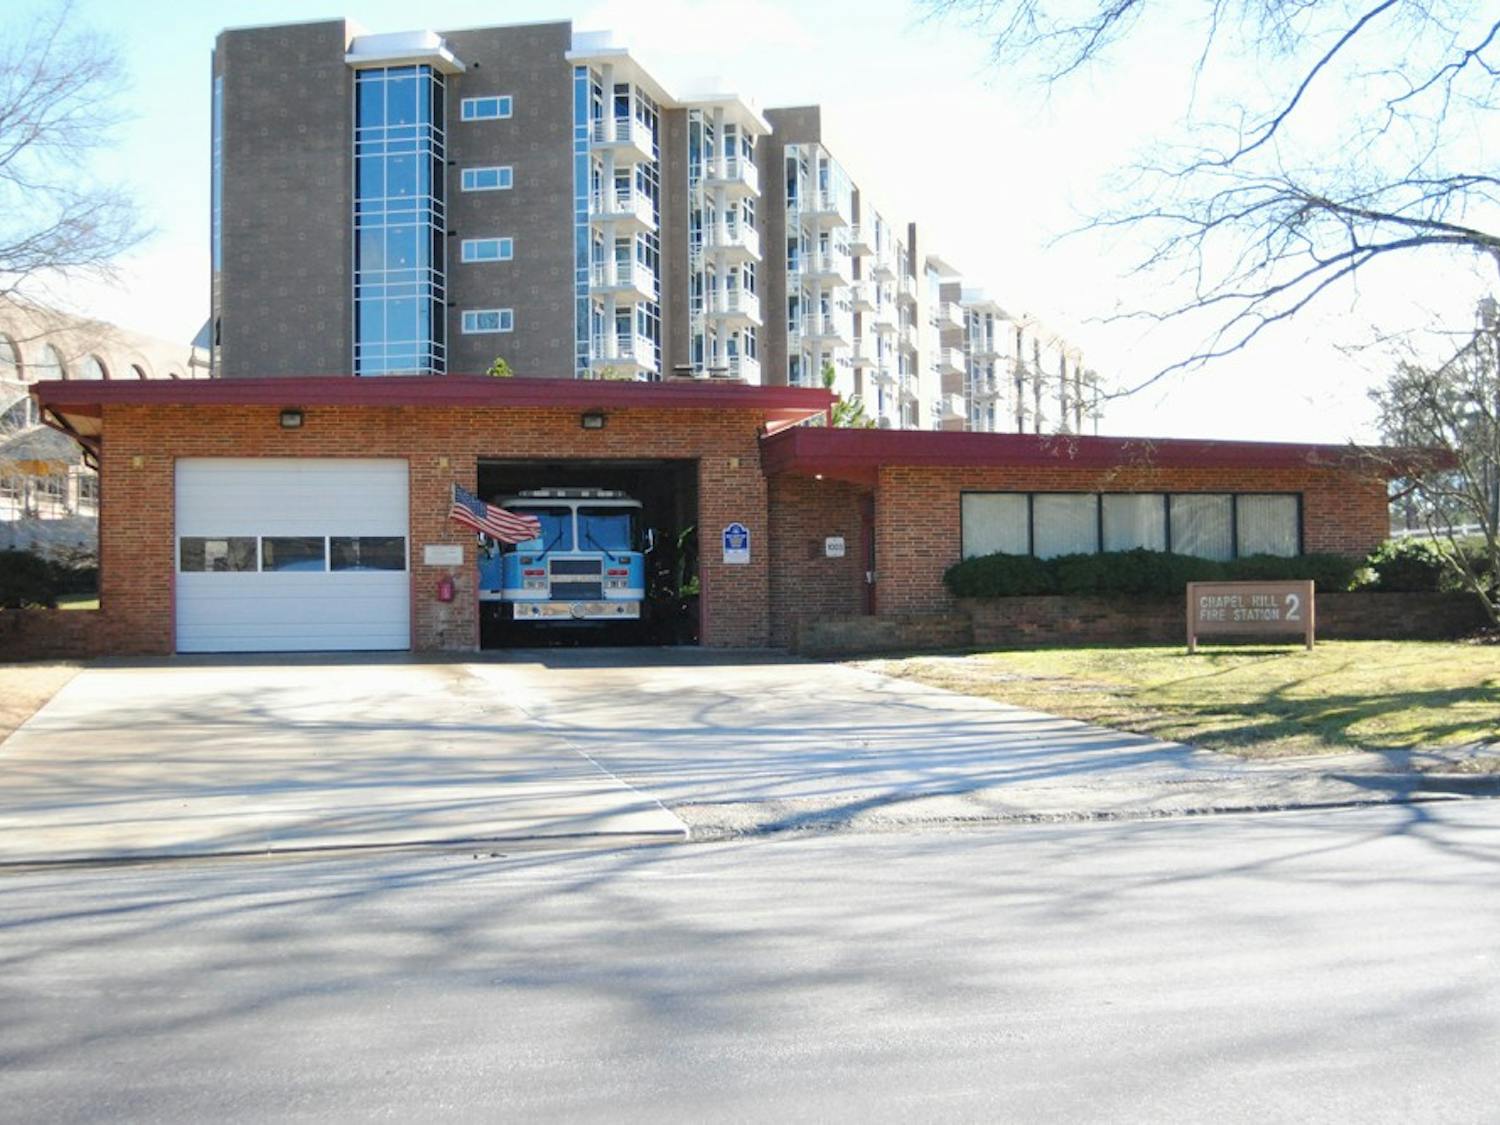 The Hamilton Road Fire Station is getting renovated after being on Chapel Hill’s list of investment projects for at least 10 years.